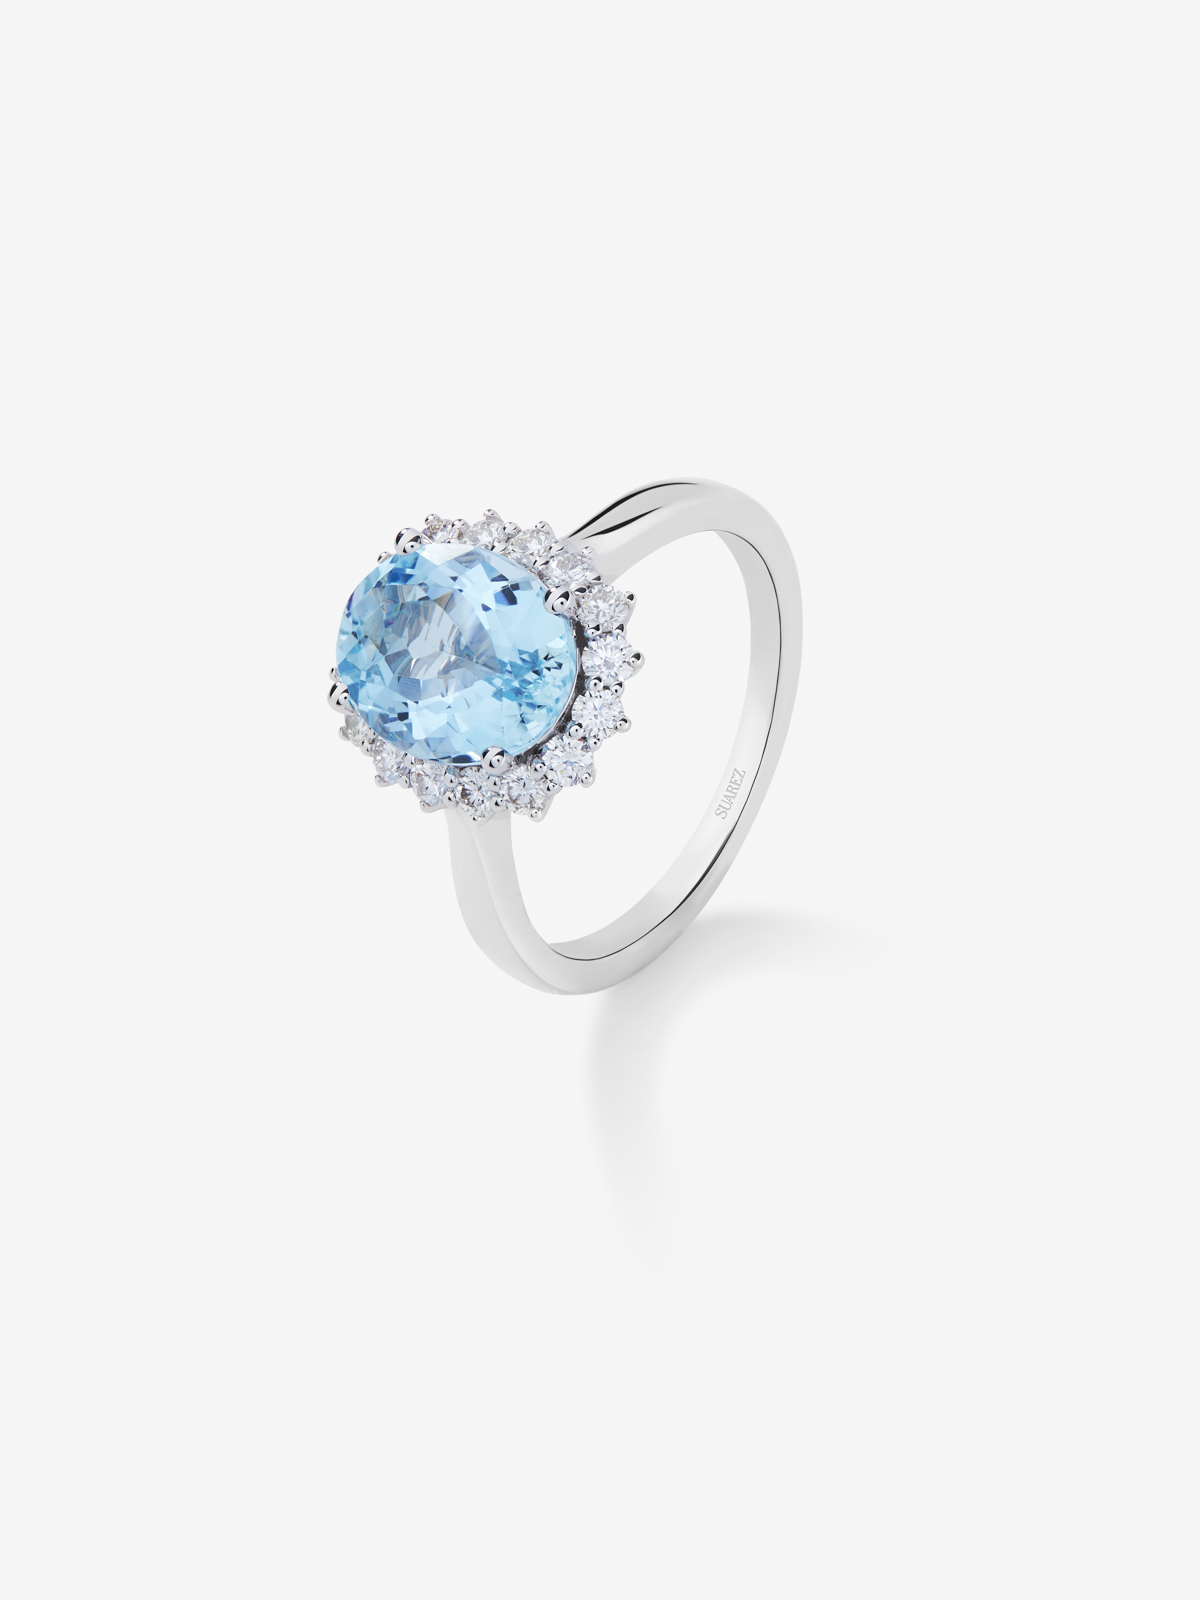 18K White Gold Ring with Aguamarine in 4.29 cts and white diamonds in a brilliant 0.77 cts